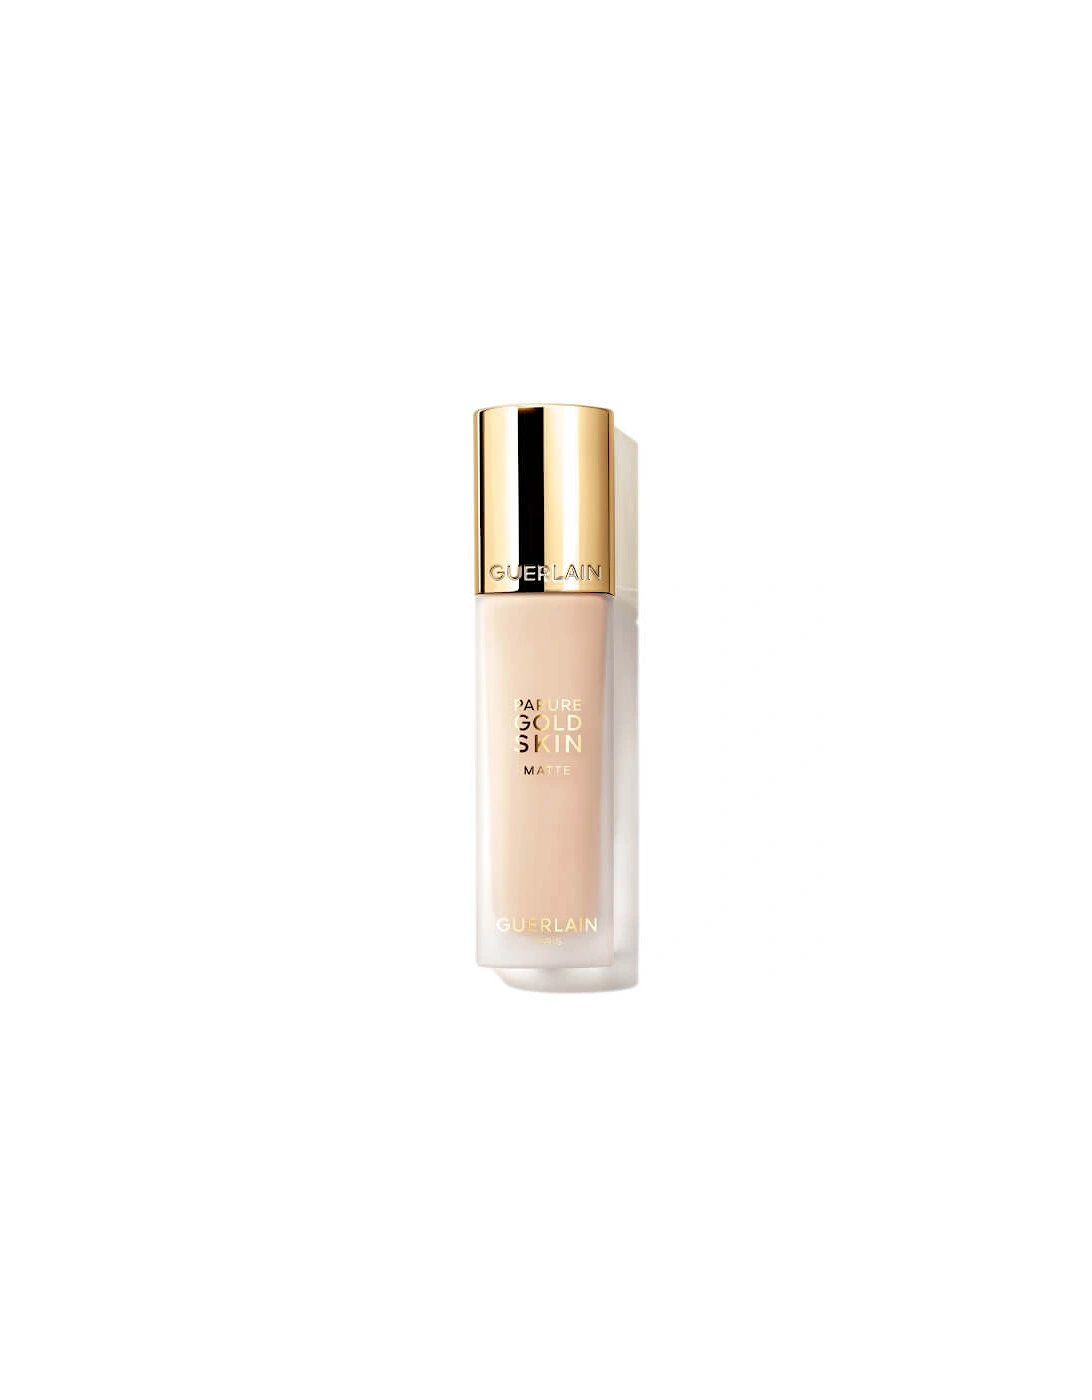 Parure Gold Skin 24H No-Transfer High Perfection Foundation - 1.5N Neutral / Neutre, 2 of 1